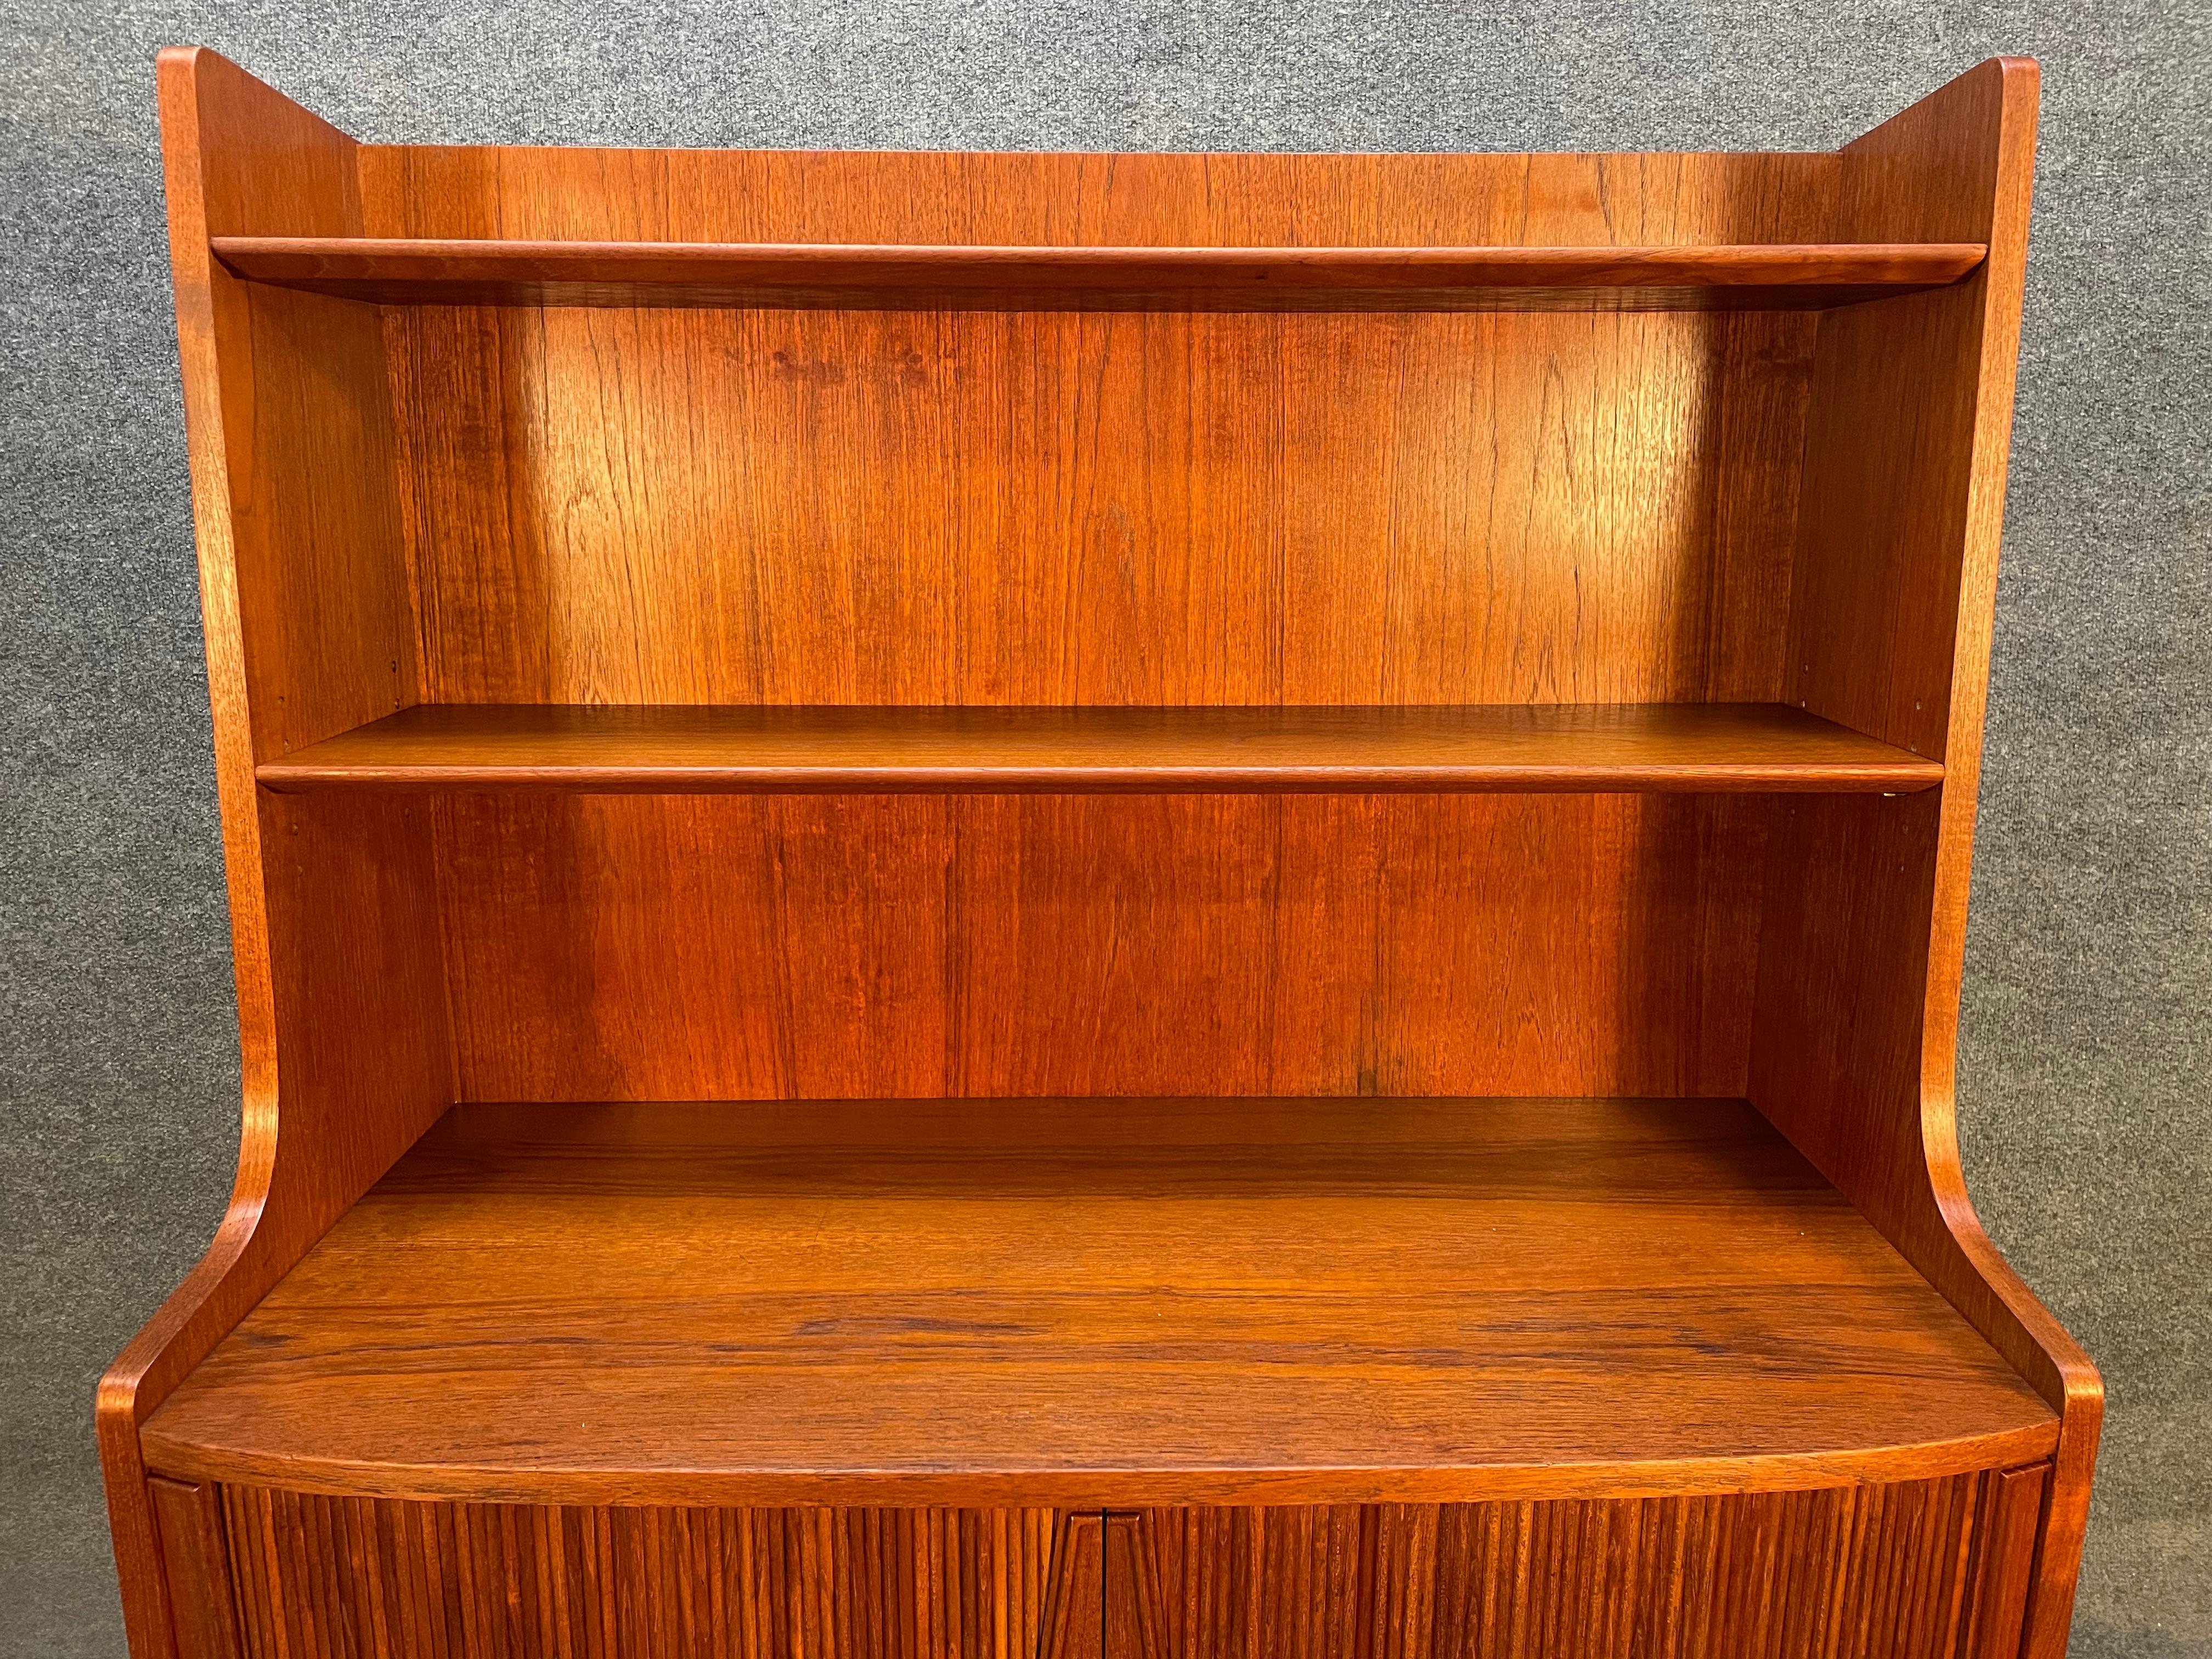 Here is a rare 1960's scandinavian modern case piece in teak designed by Johannes Sorth manufactured by Nexxo Mobelfabrik in Denmark.
This exquisite piece, recently, imported from Denmark to California before its refinishing, features a vibrant